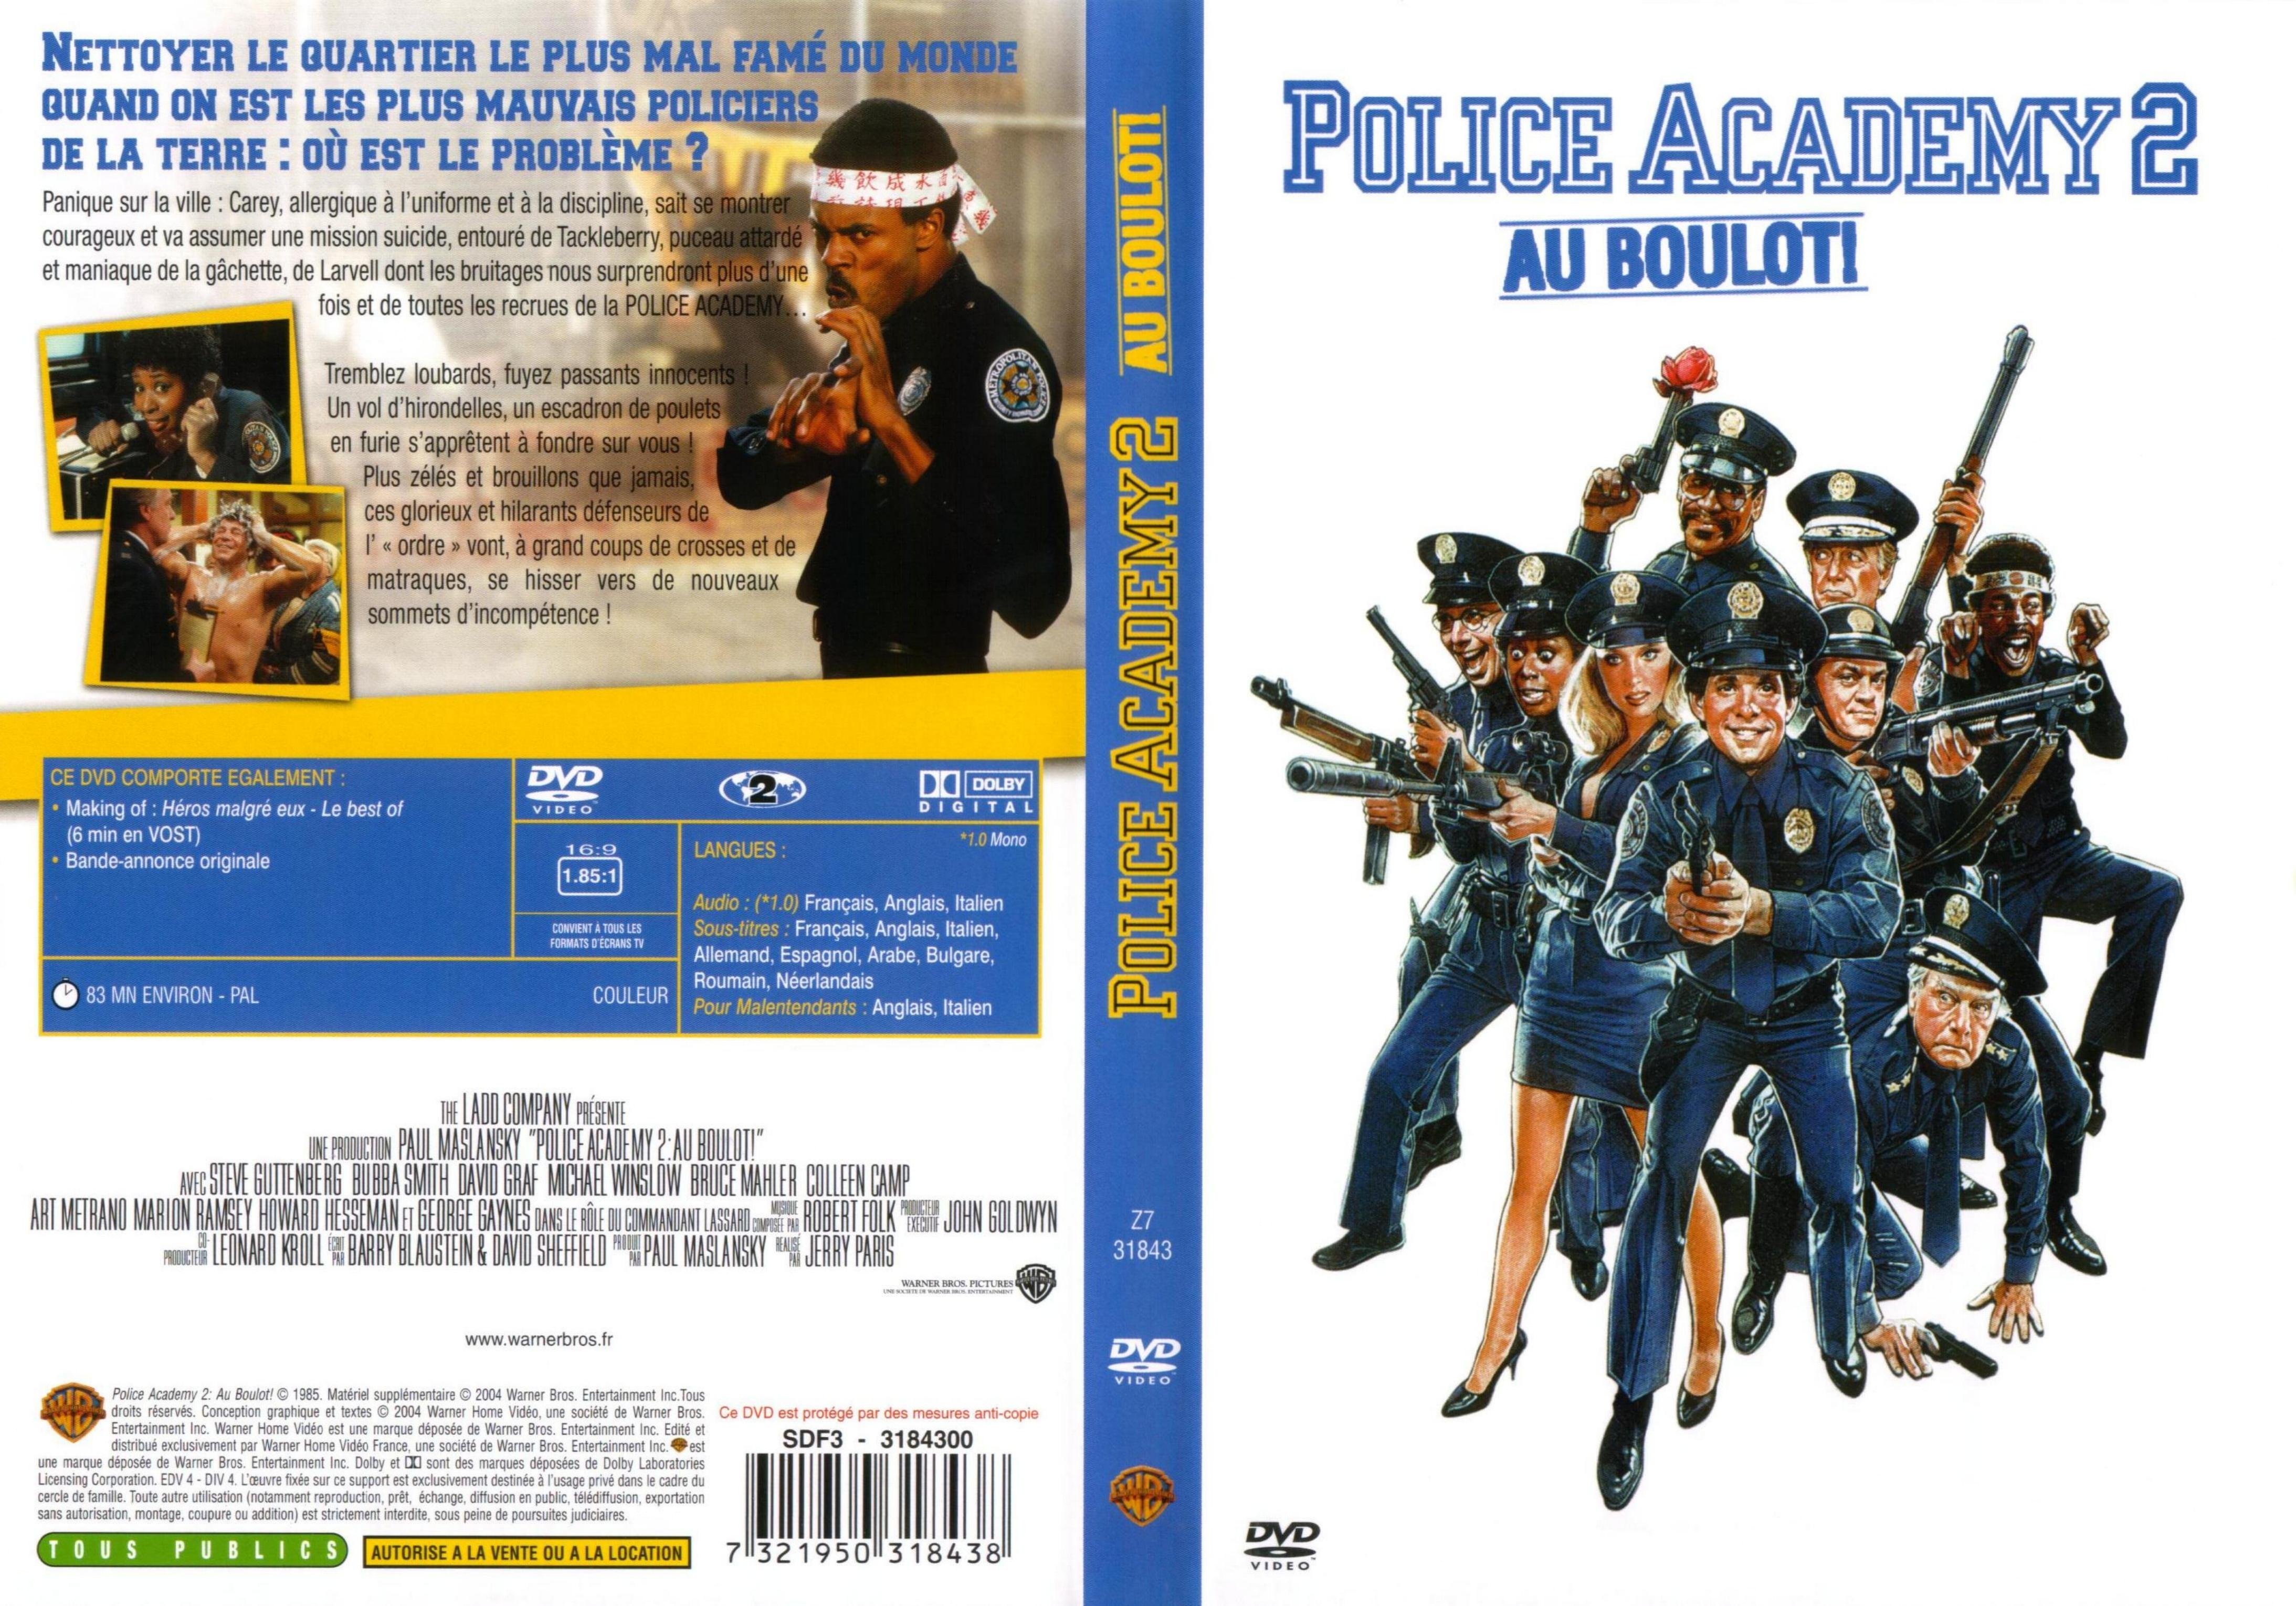 Jaquette DVD Police academy 2